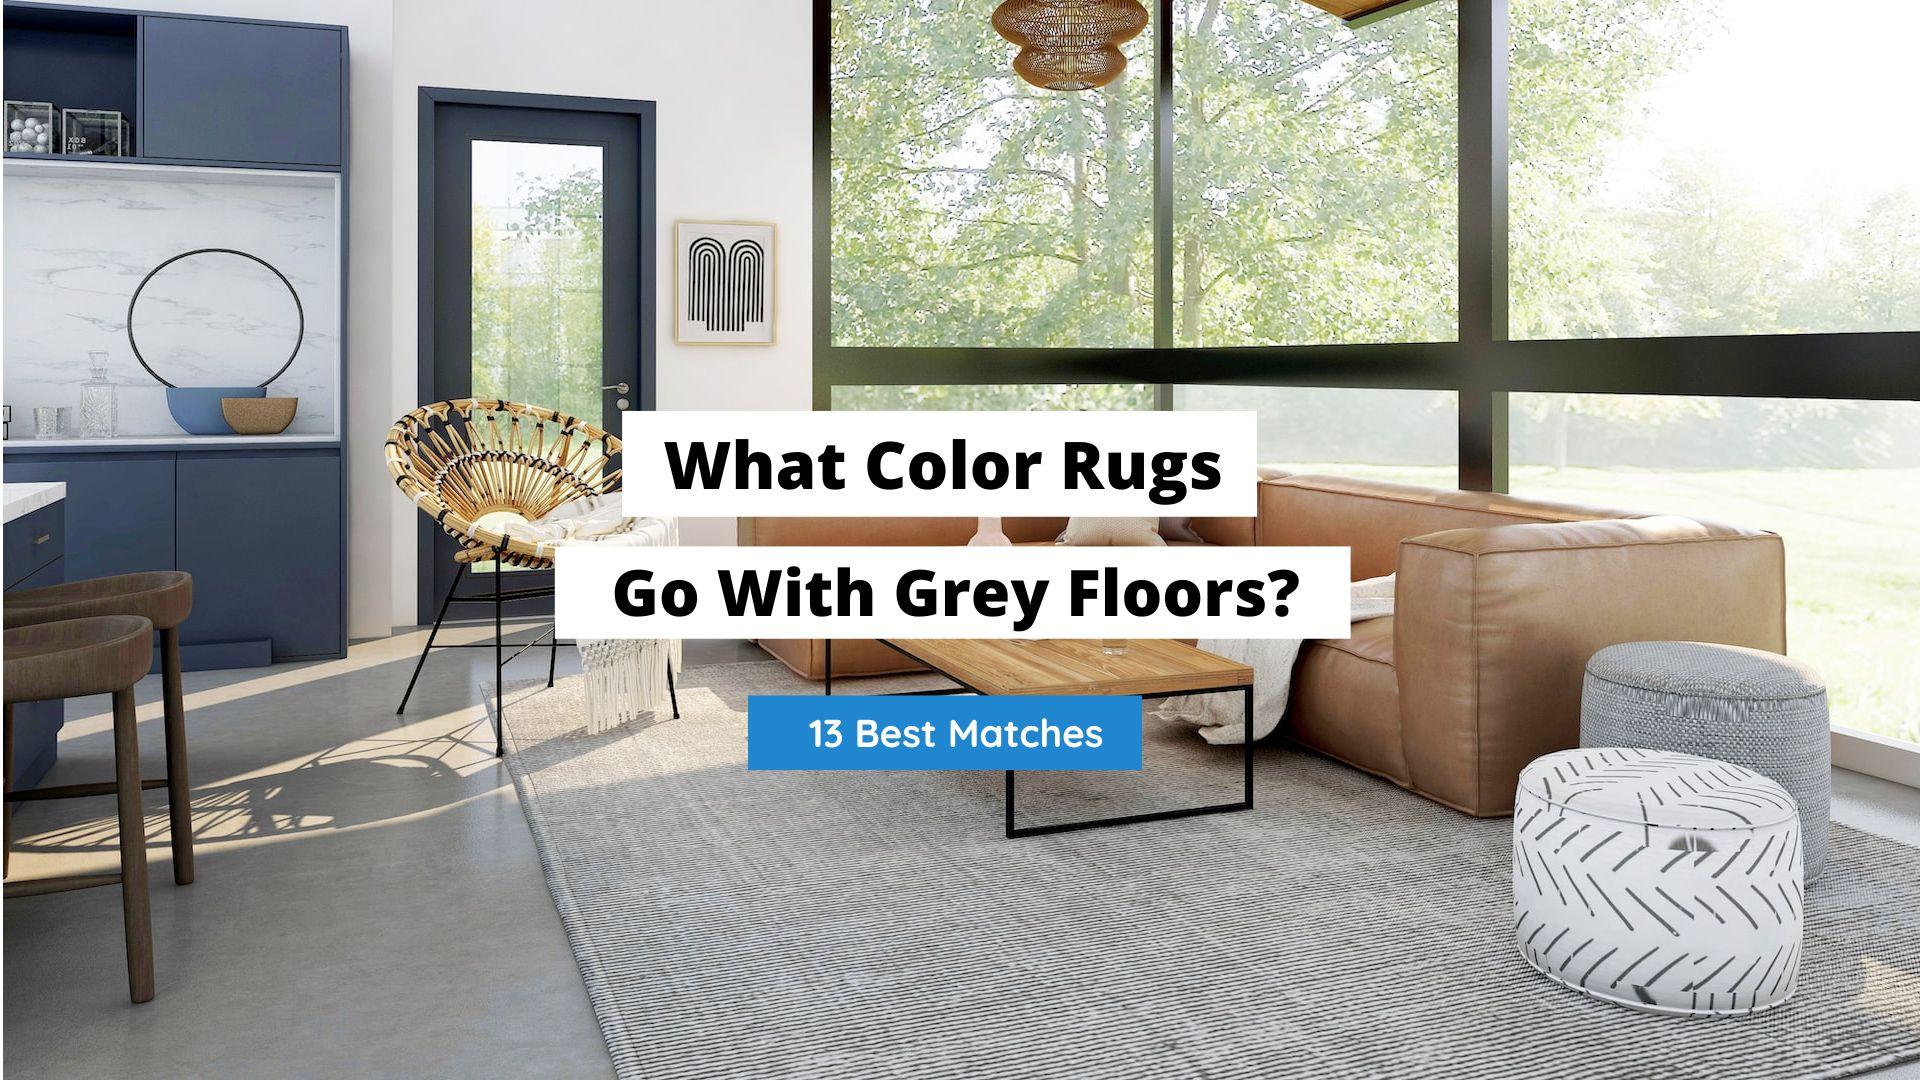 what color rugs go with grey floors